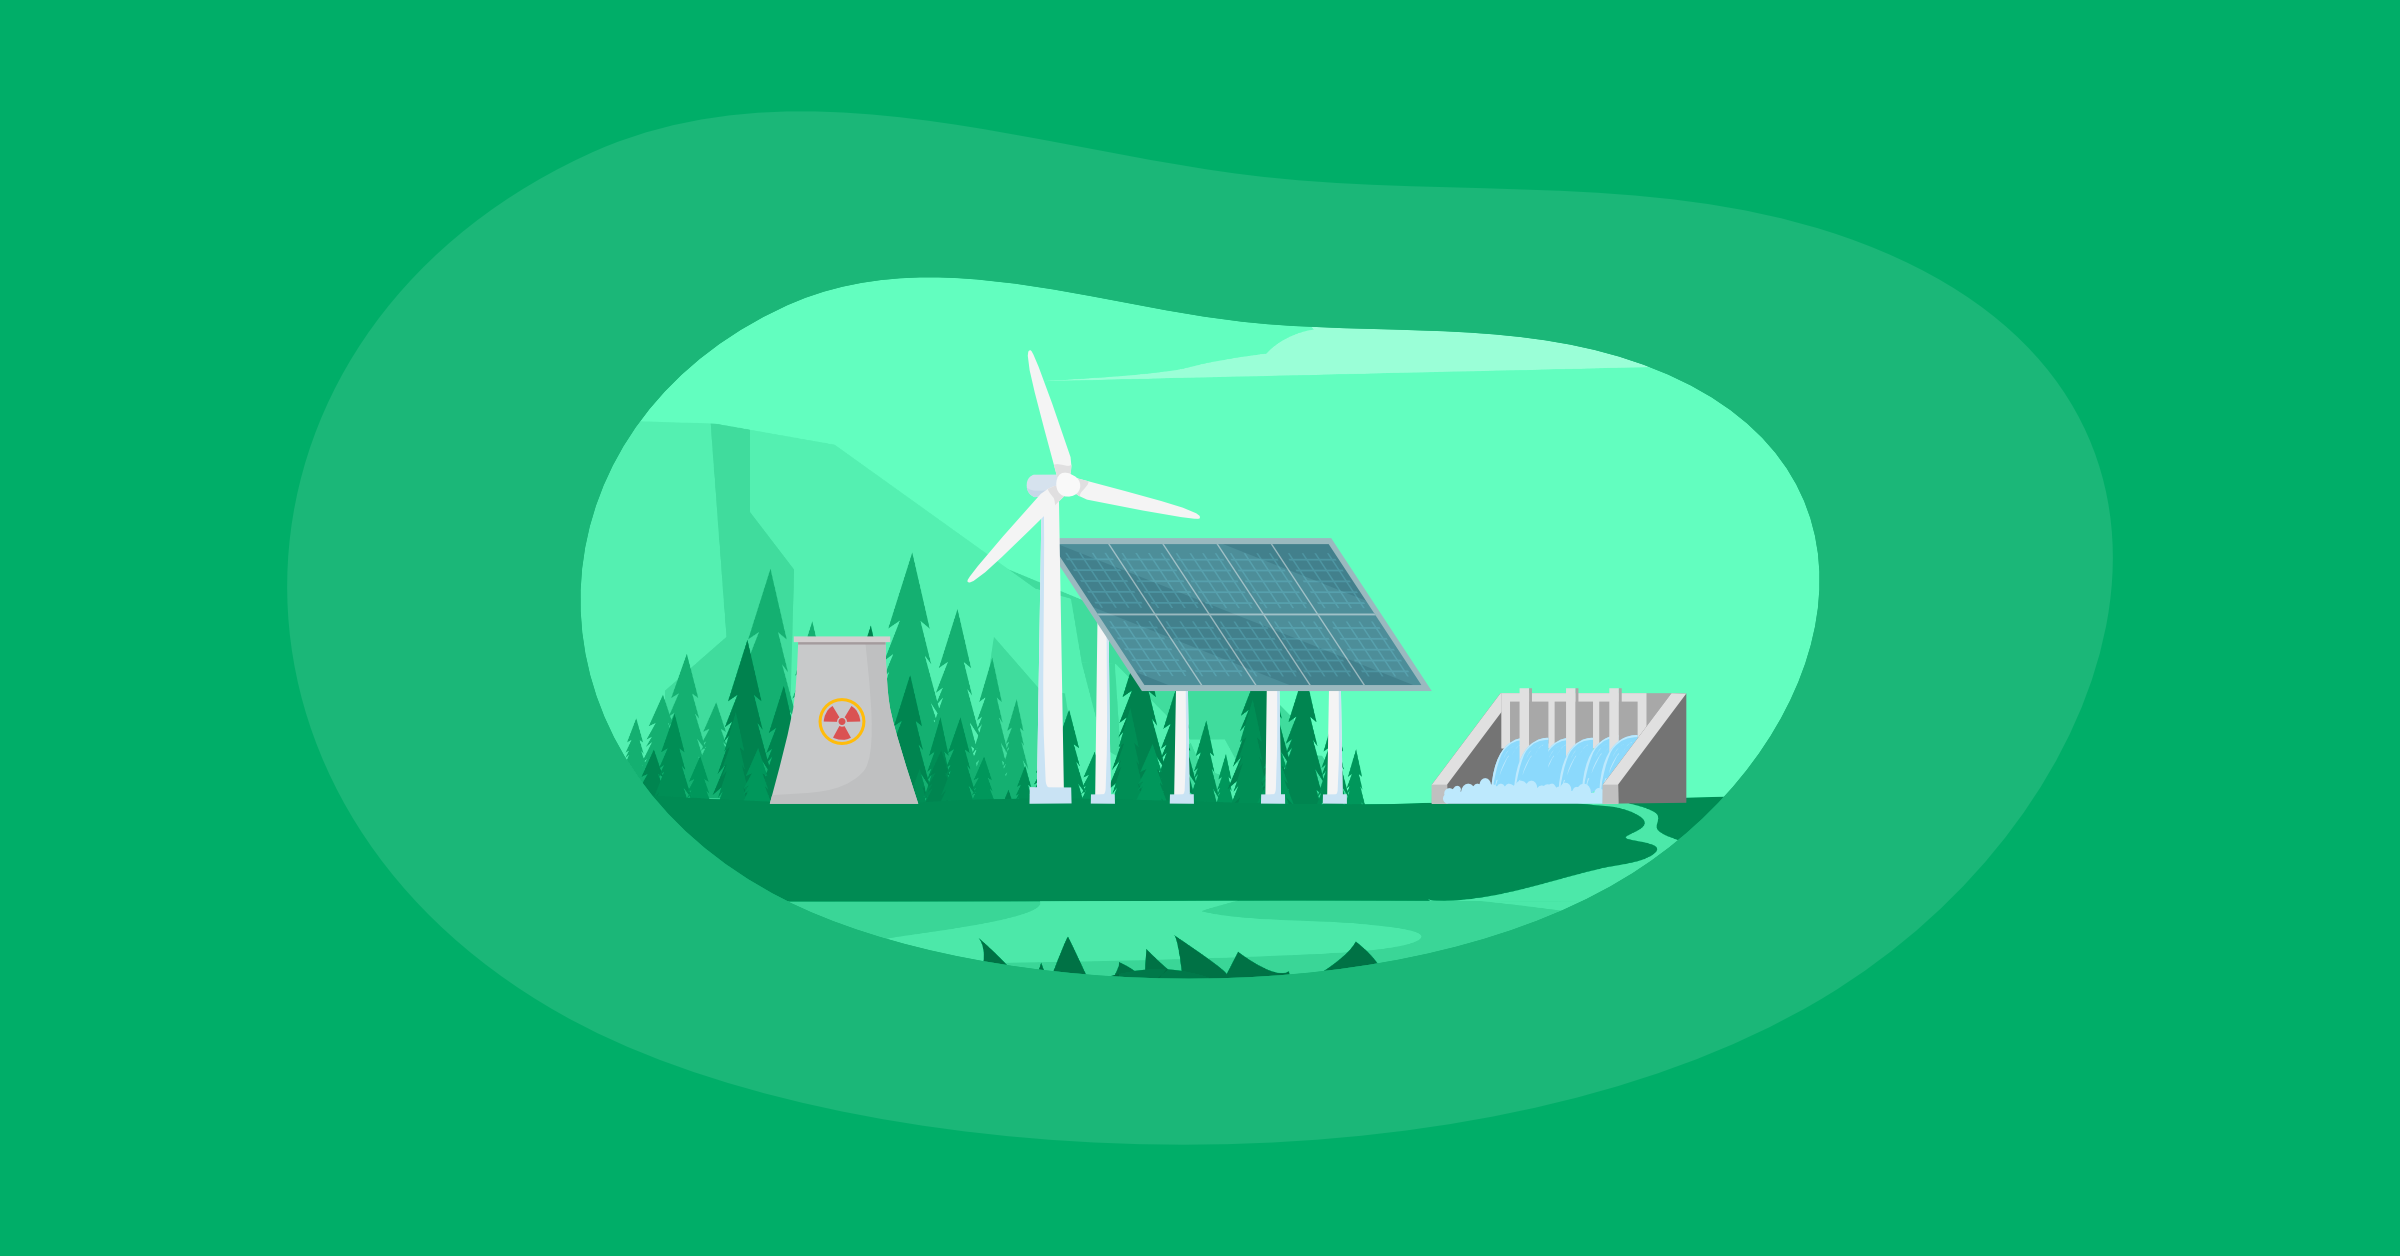 Illustration of clean and green energies